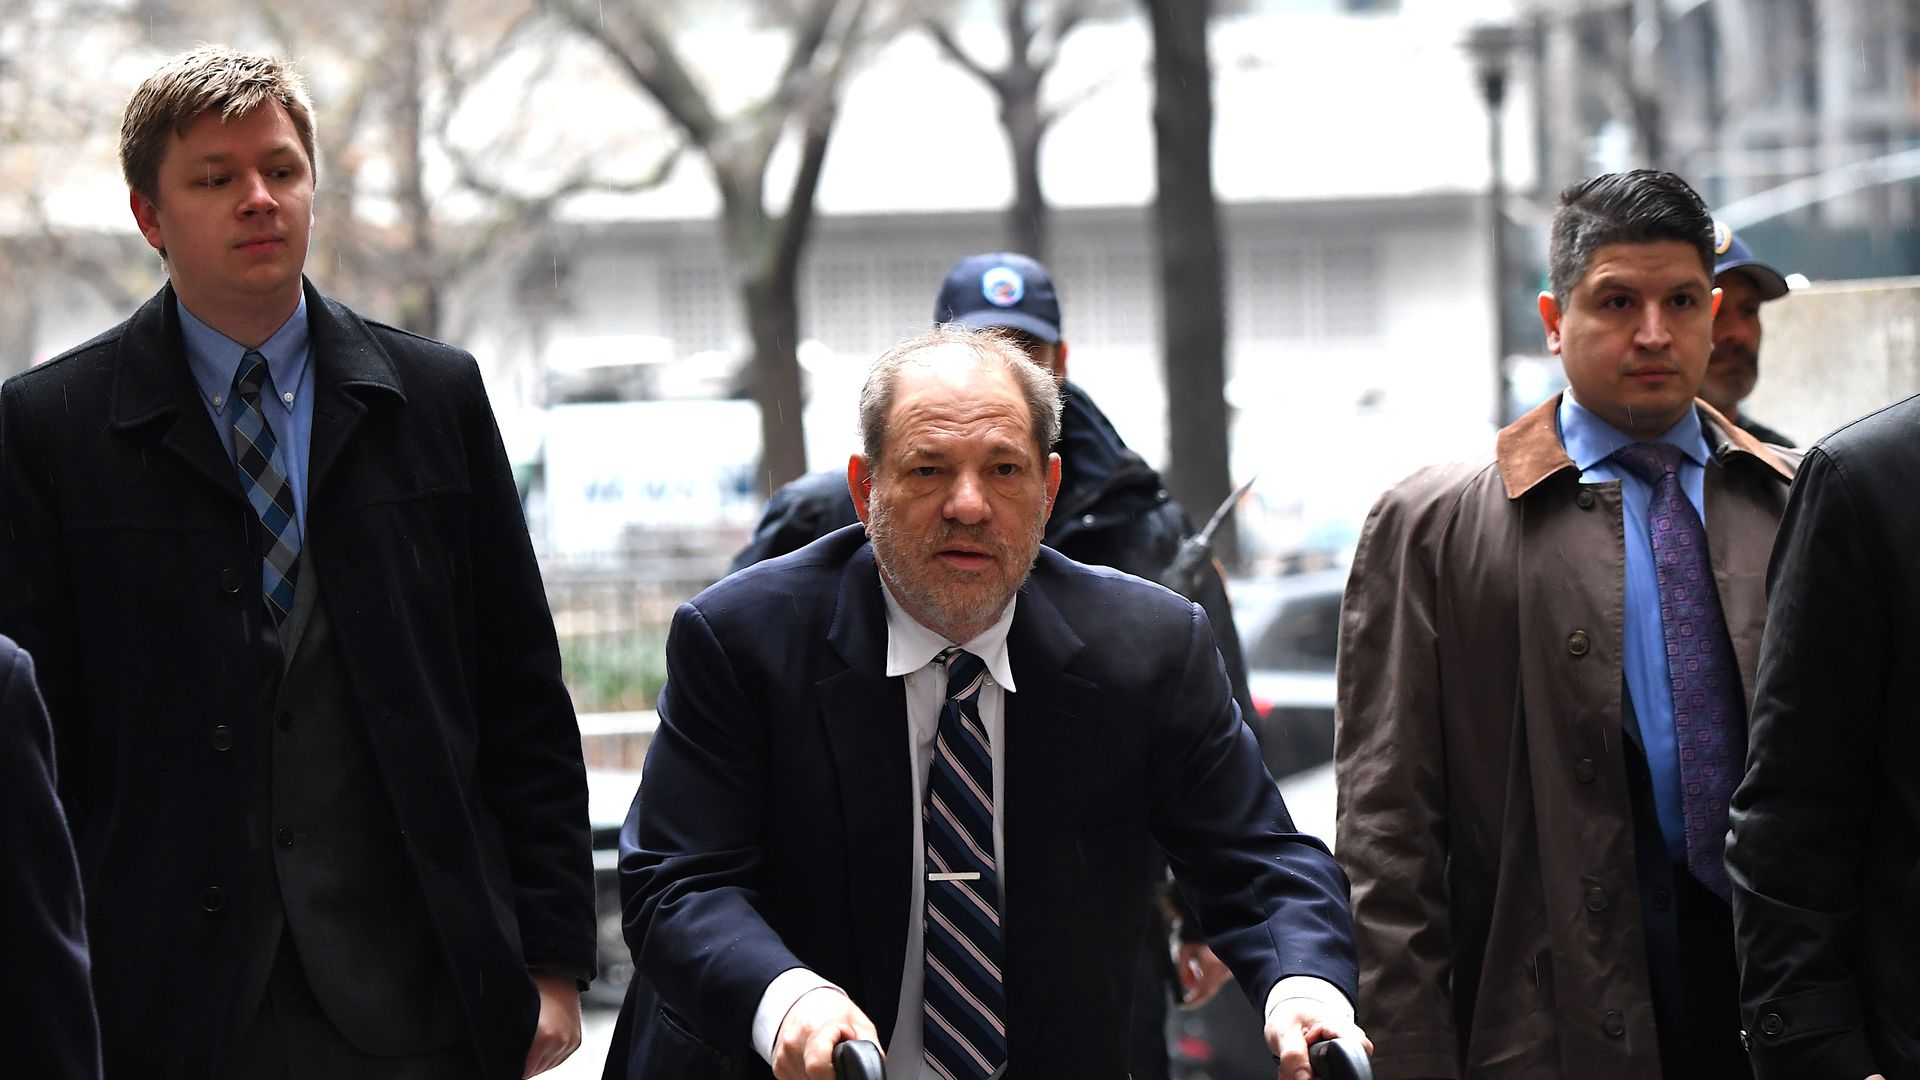 Harvey Weinstein arriving to court with a walking aid